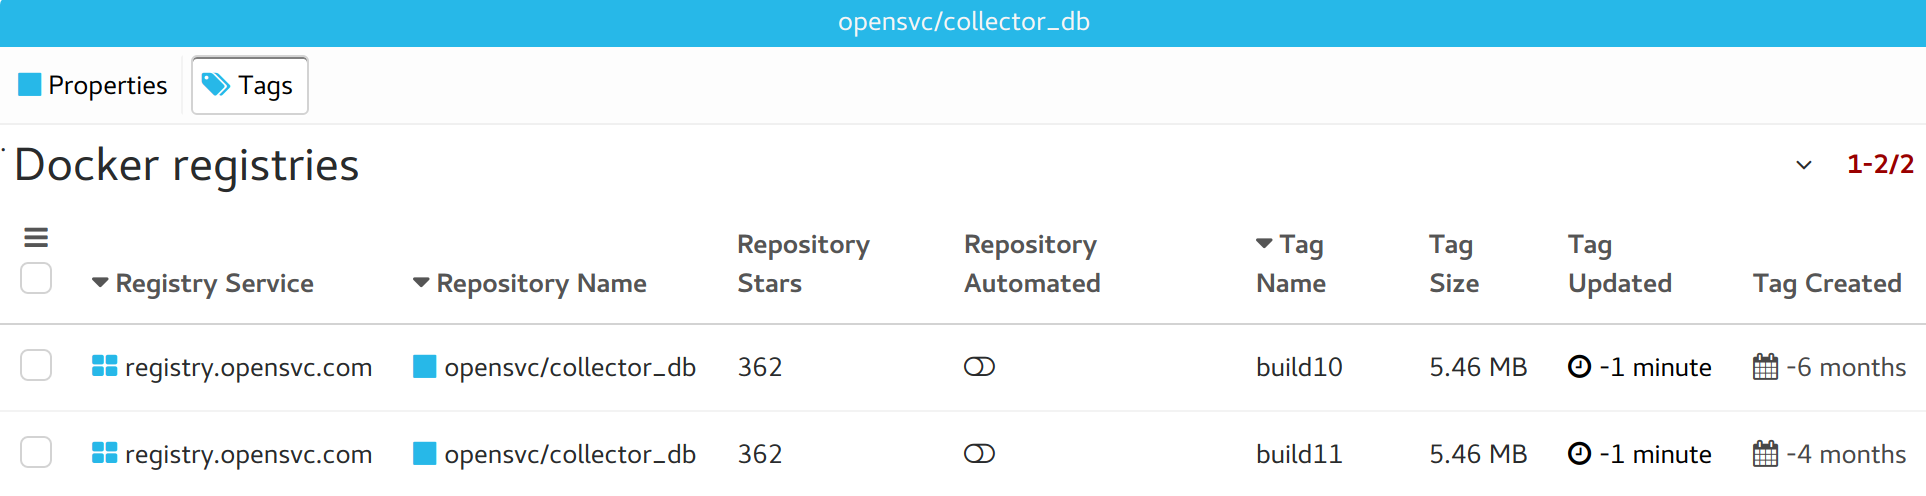 _images/collector.tabs.docker_repository.tags.png